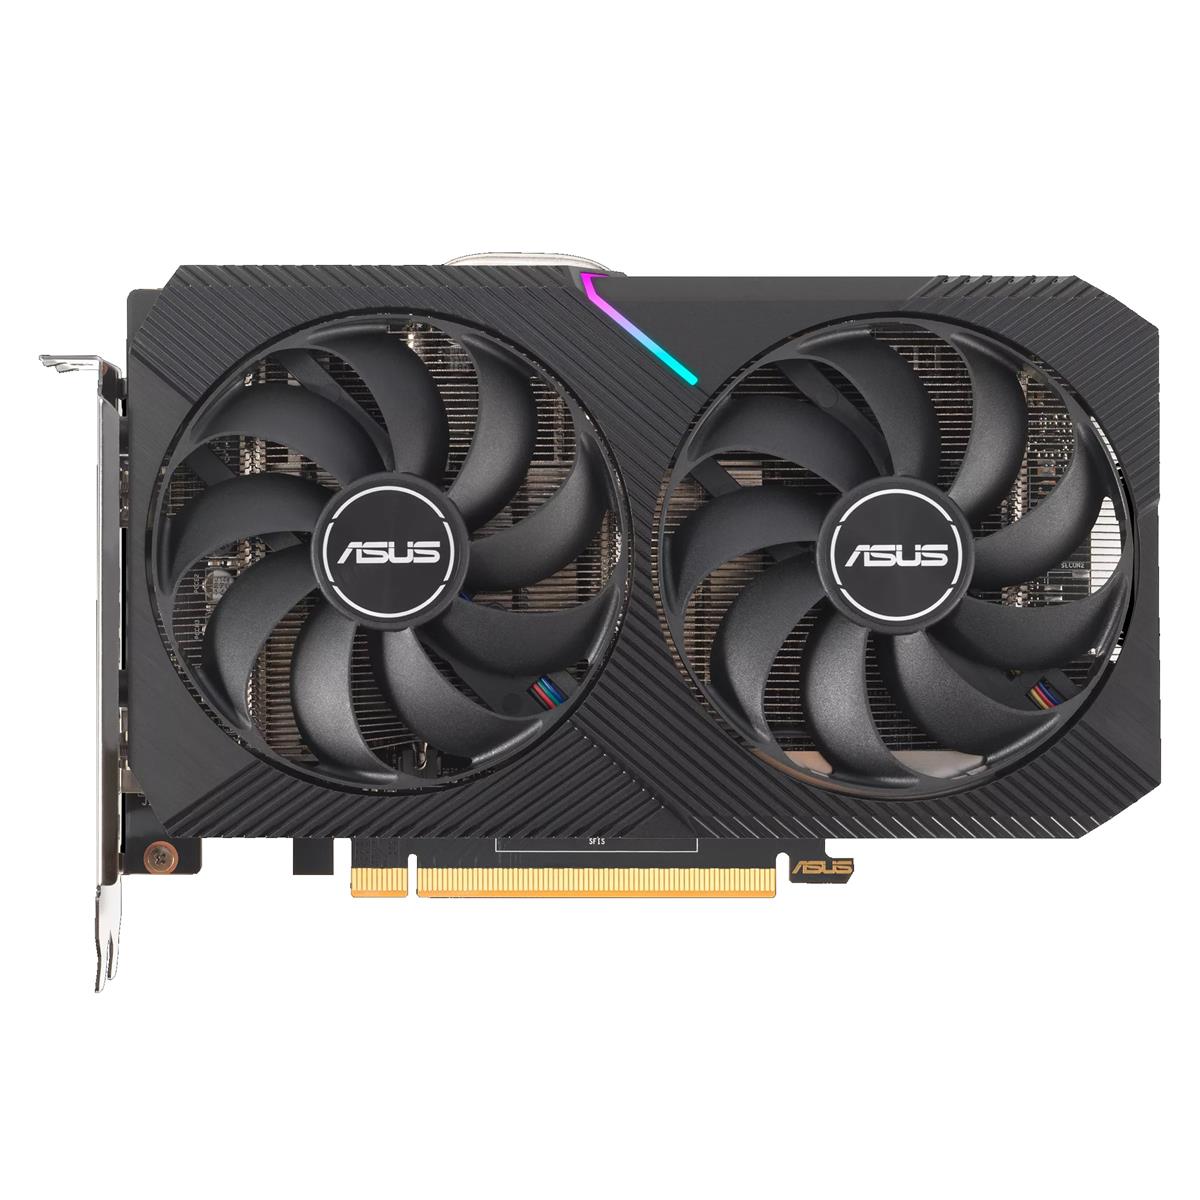 ASUS Dual Radeon™ RX 6500 XT OC Edition GDDR6 4GB with Axial-tech two powerful fans and a 2-slot design